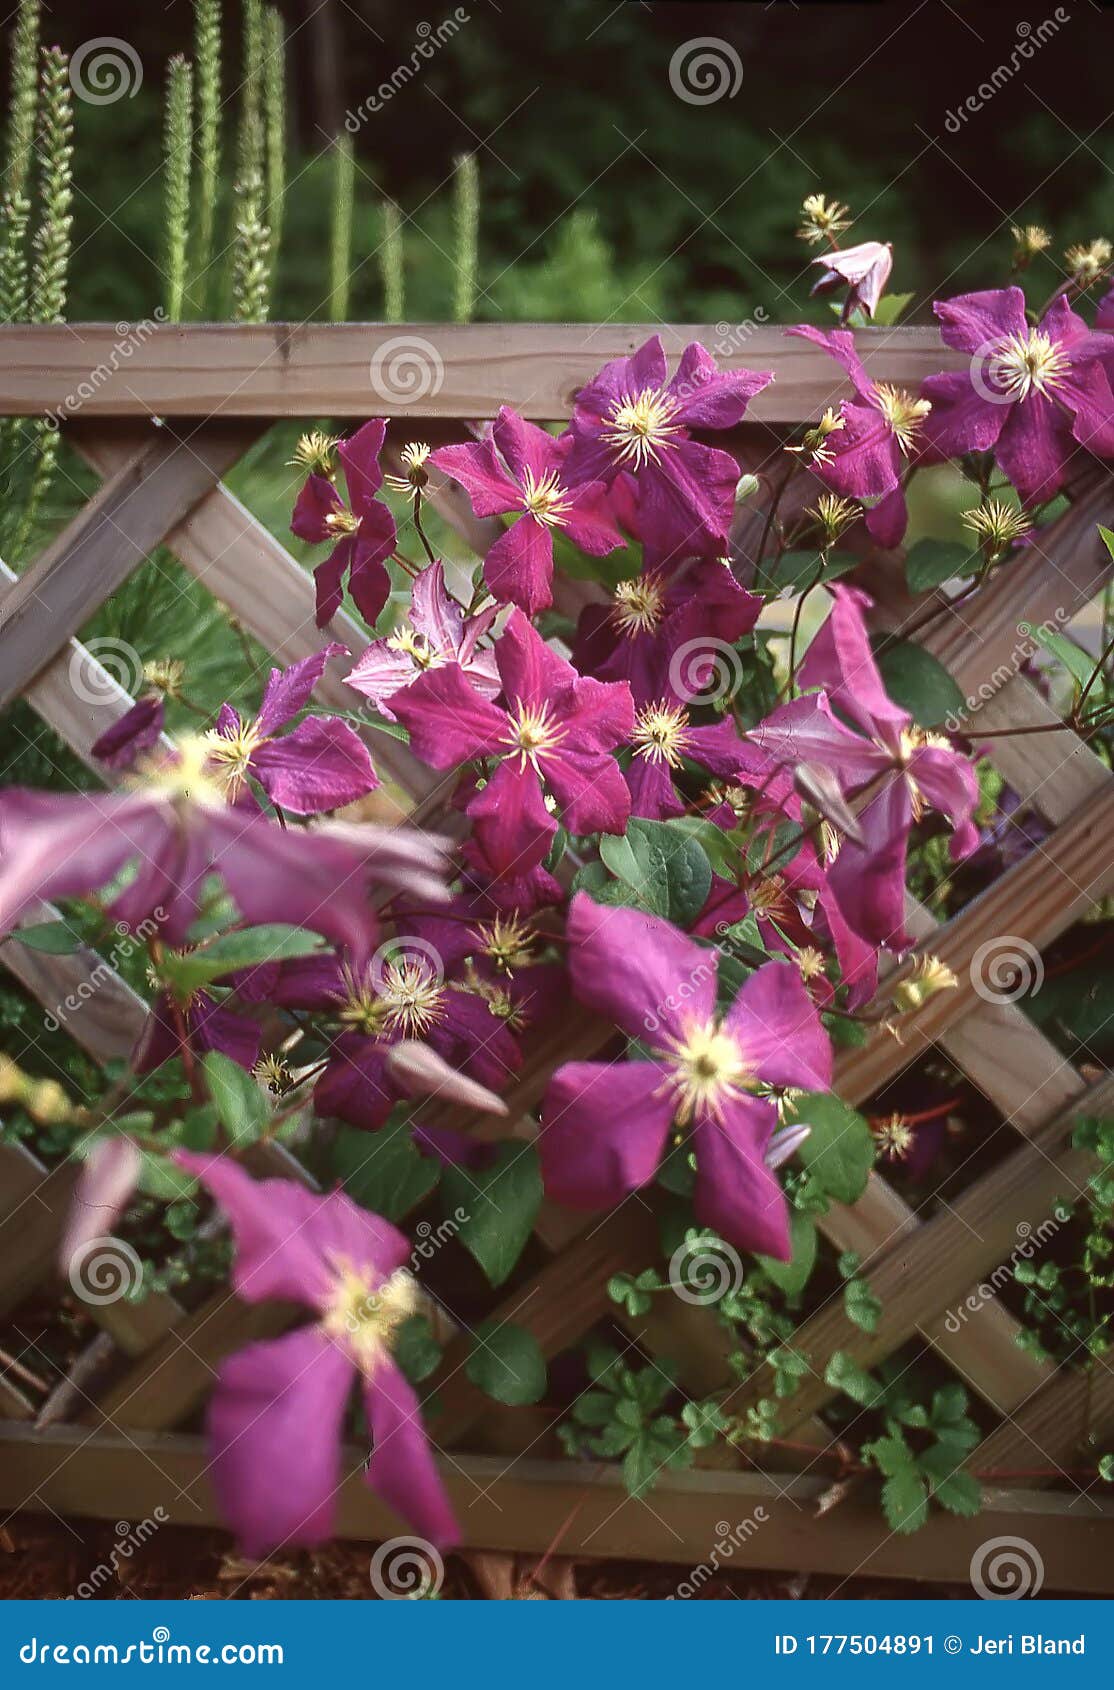 Clematis Viticella `Etoile Violette` Climbing the Fence Stock Image - Image  of plant, bloom: 177504891